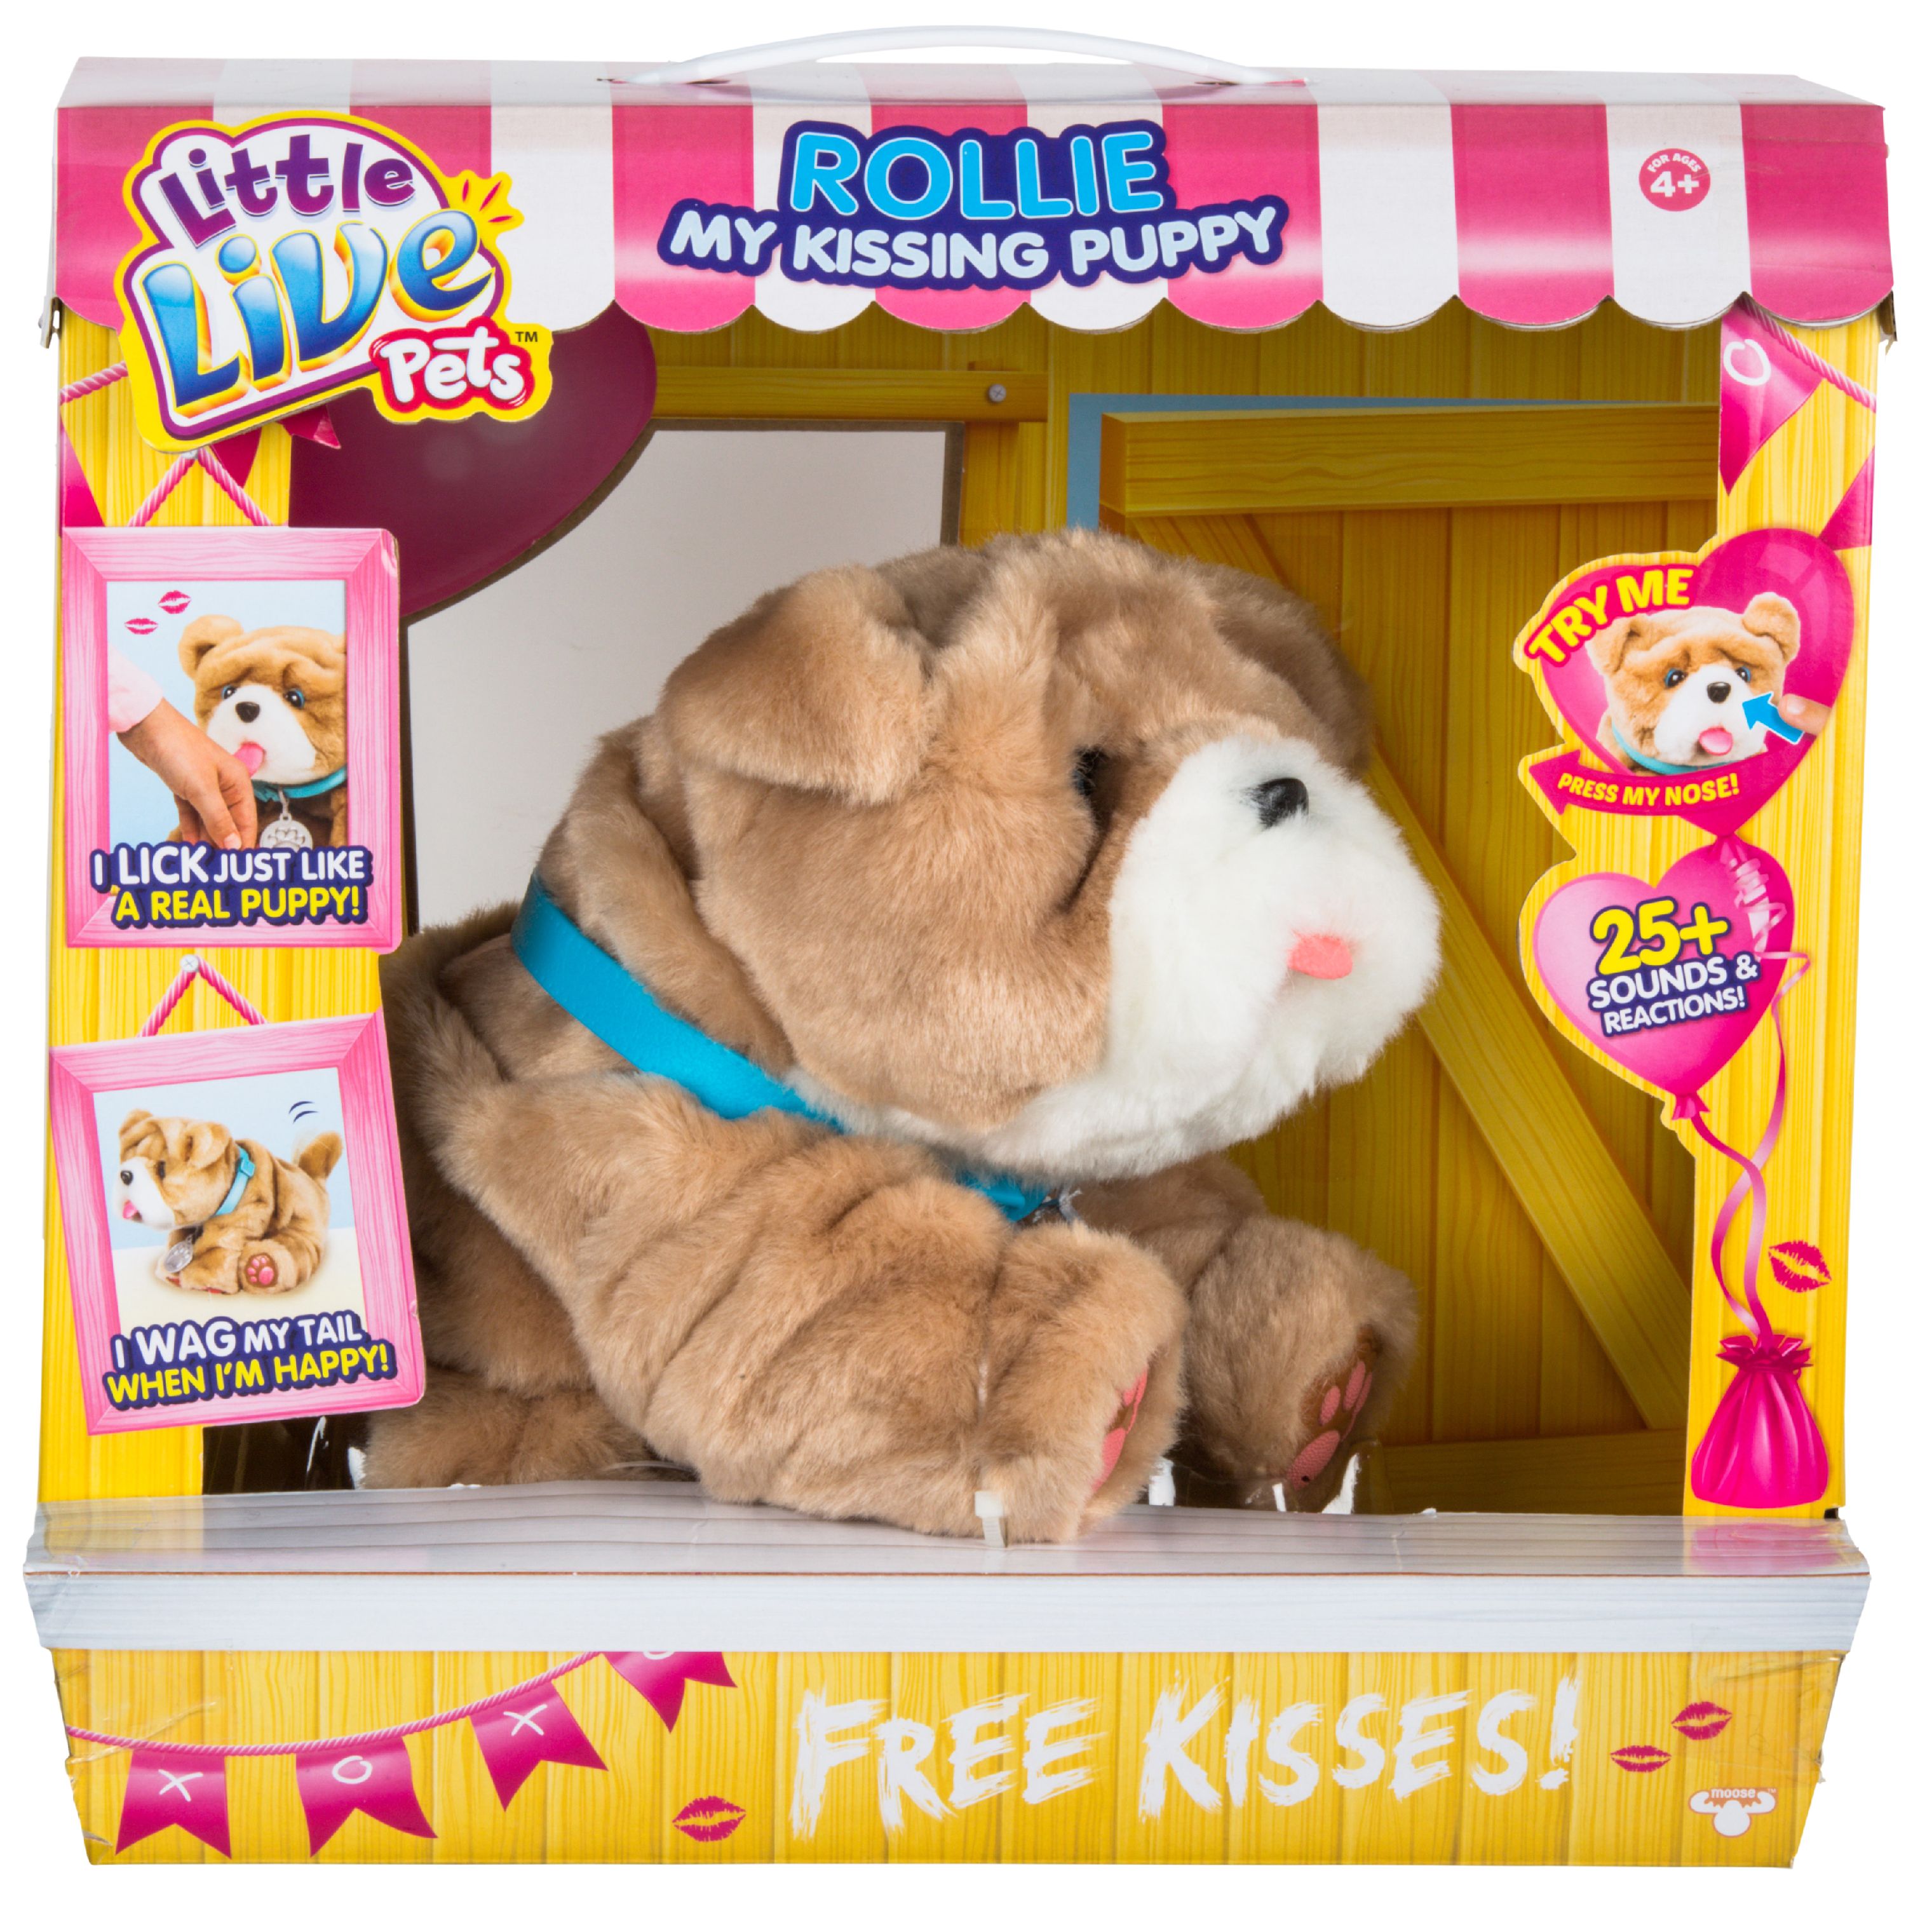 Little Live Pets My Kissing Puppy, Rollie the Interactive Puppy - image 4 of 9